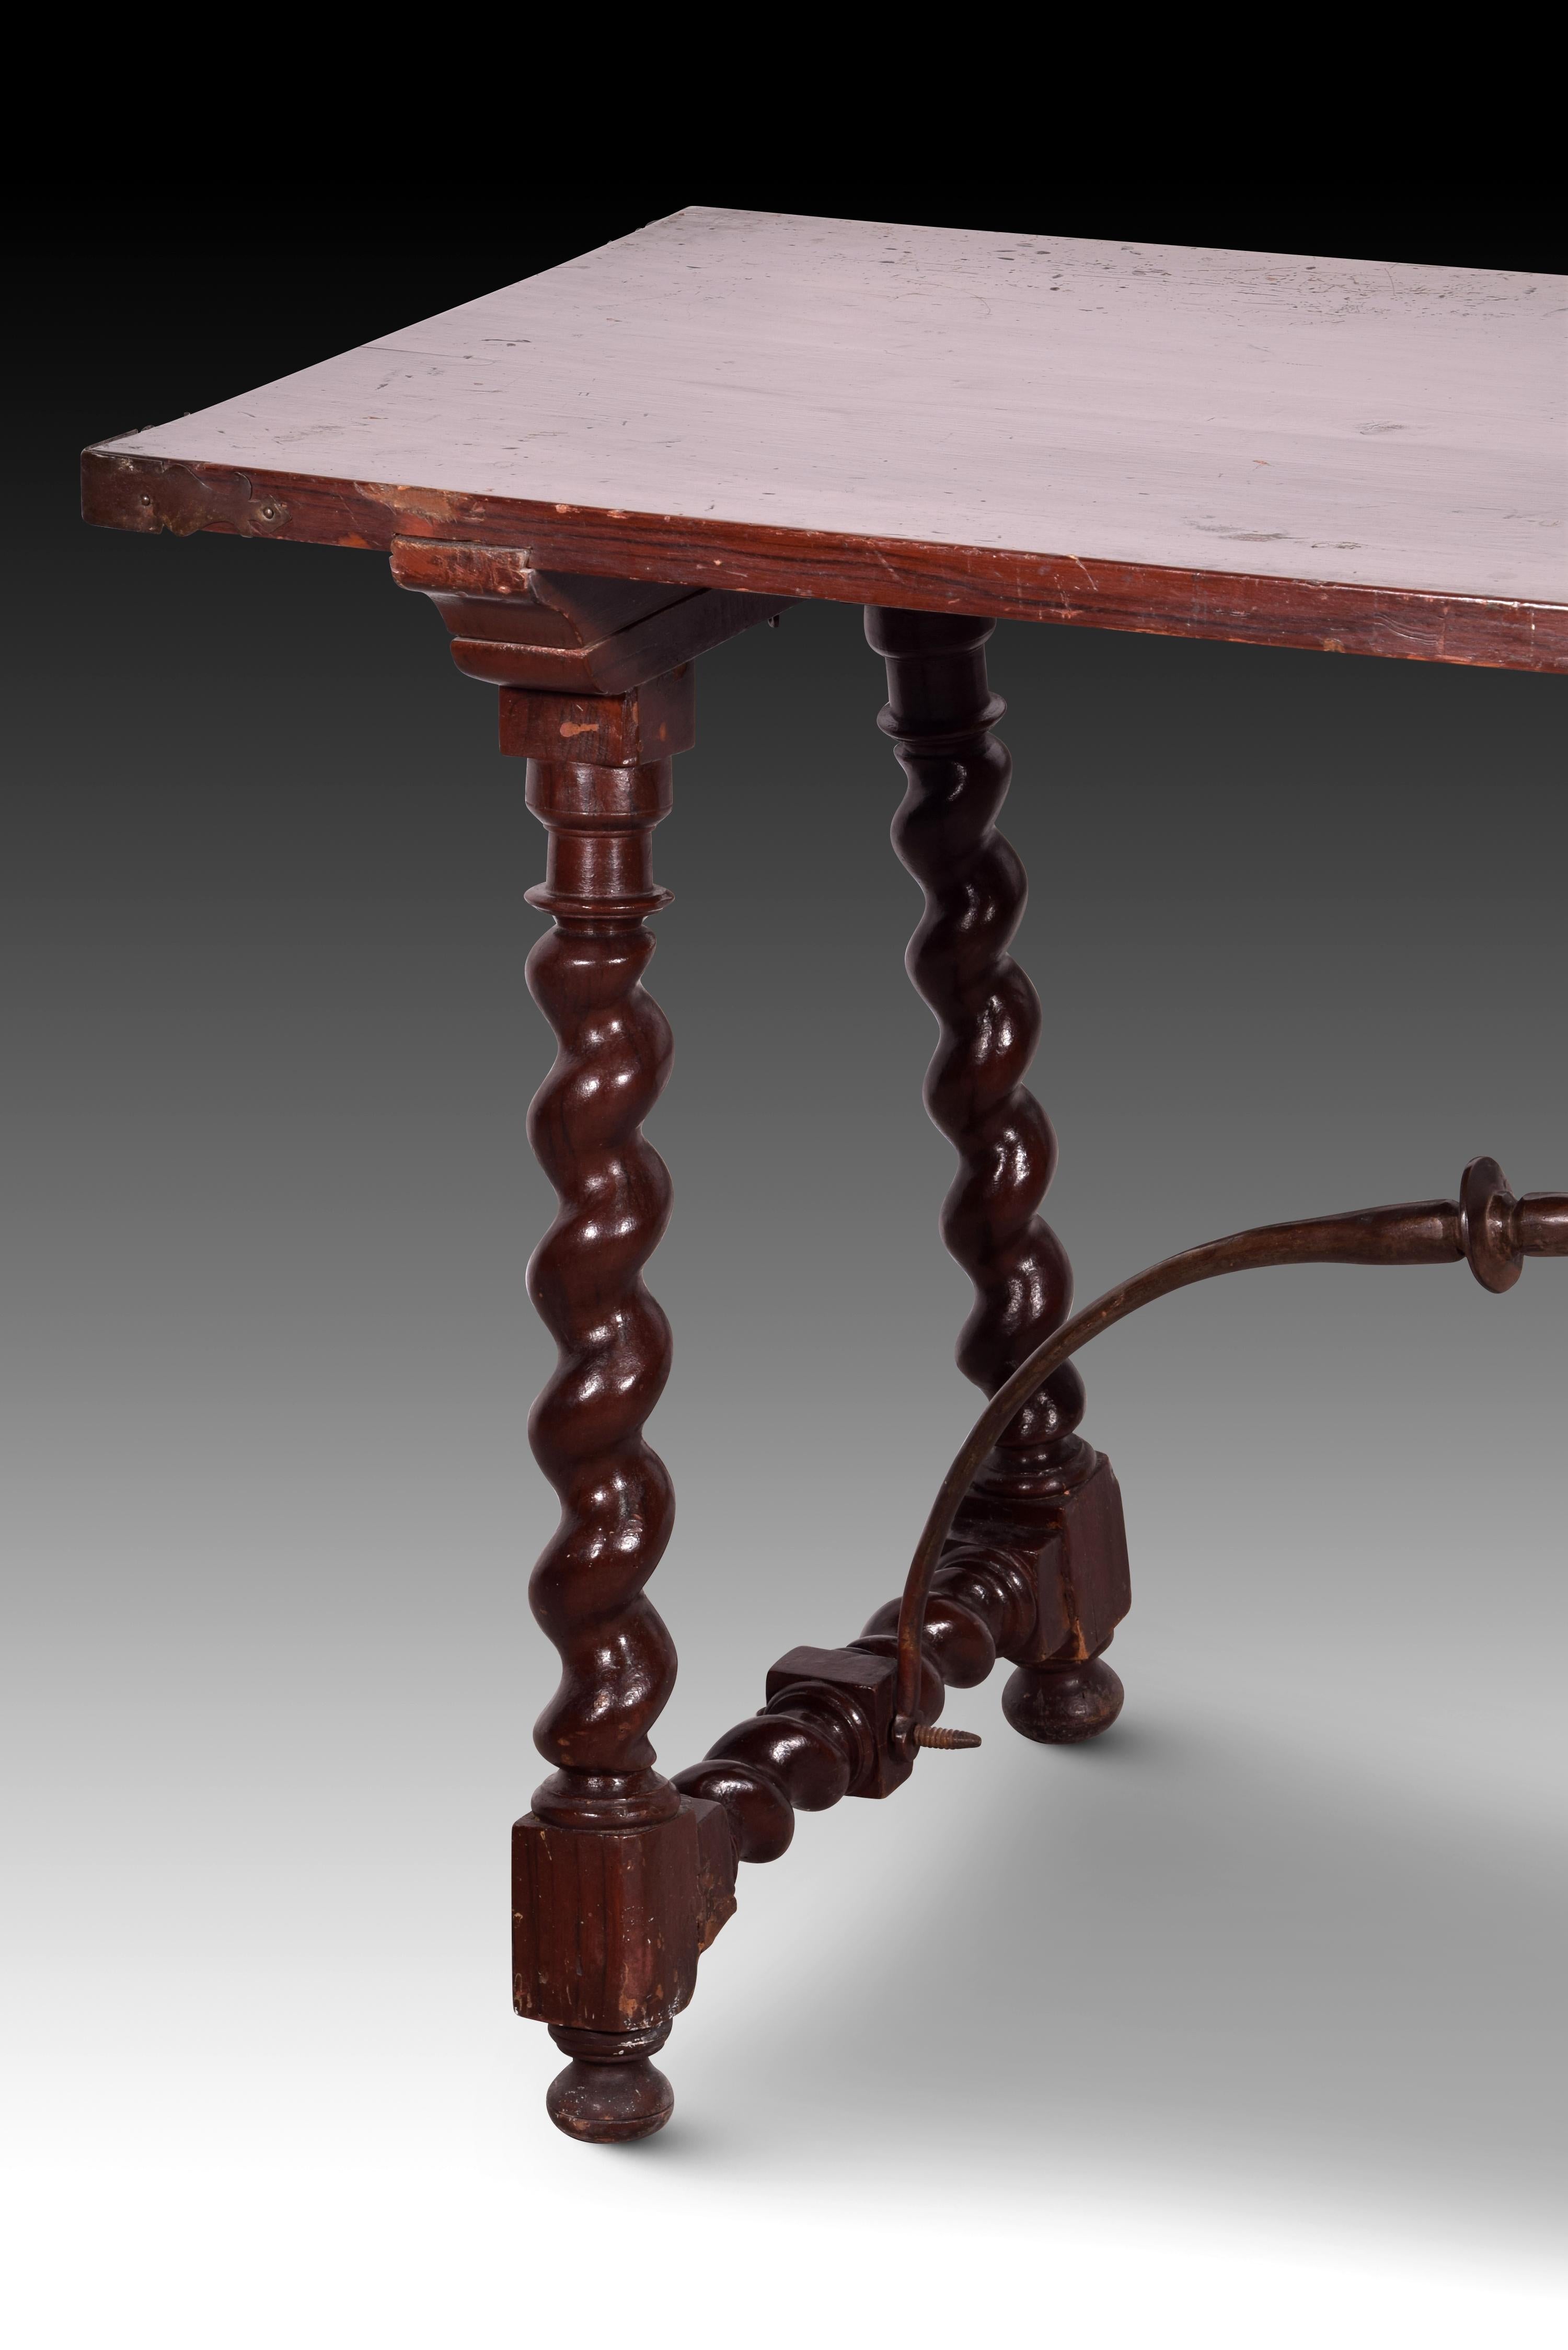 Neoclassical Table for Spanish Desk, Pine and Beech Tree Wood, Iron, 18th Century For Sale